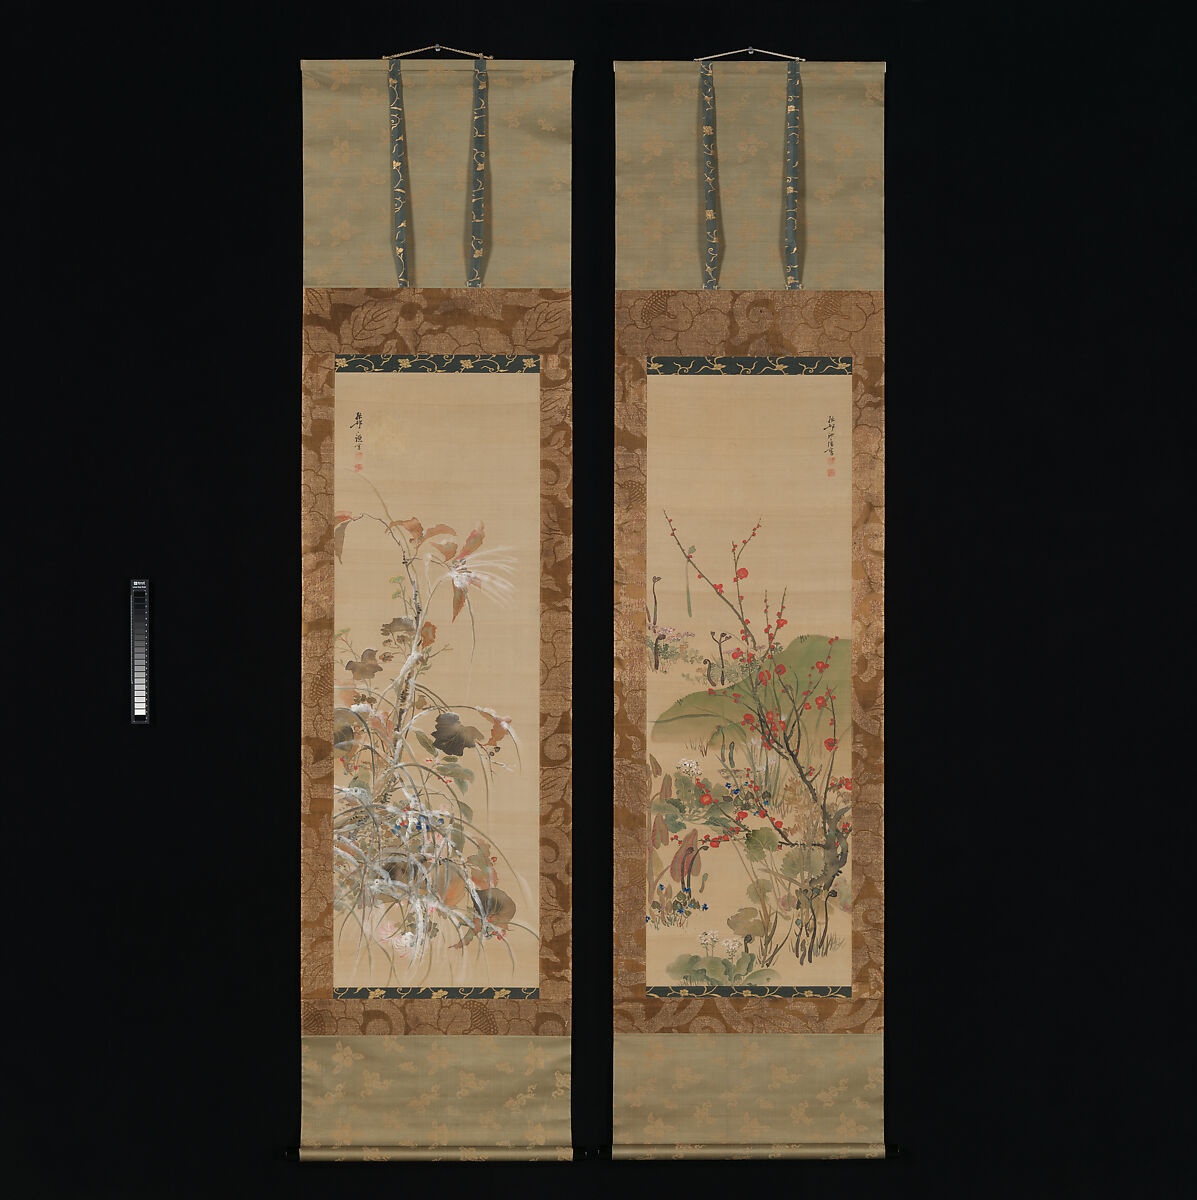 Flowers and Birds of the Four Seasons, Ikeda Koson (Japanese, 1803–1868), Pair of hanging scrolls; ink, color, and gold on silk, Japan 